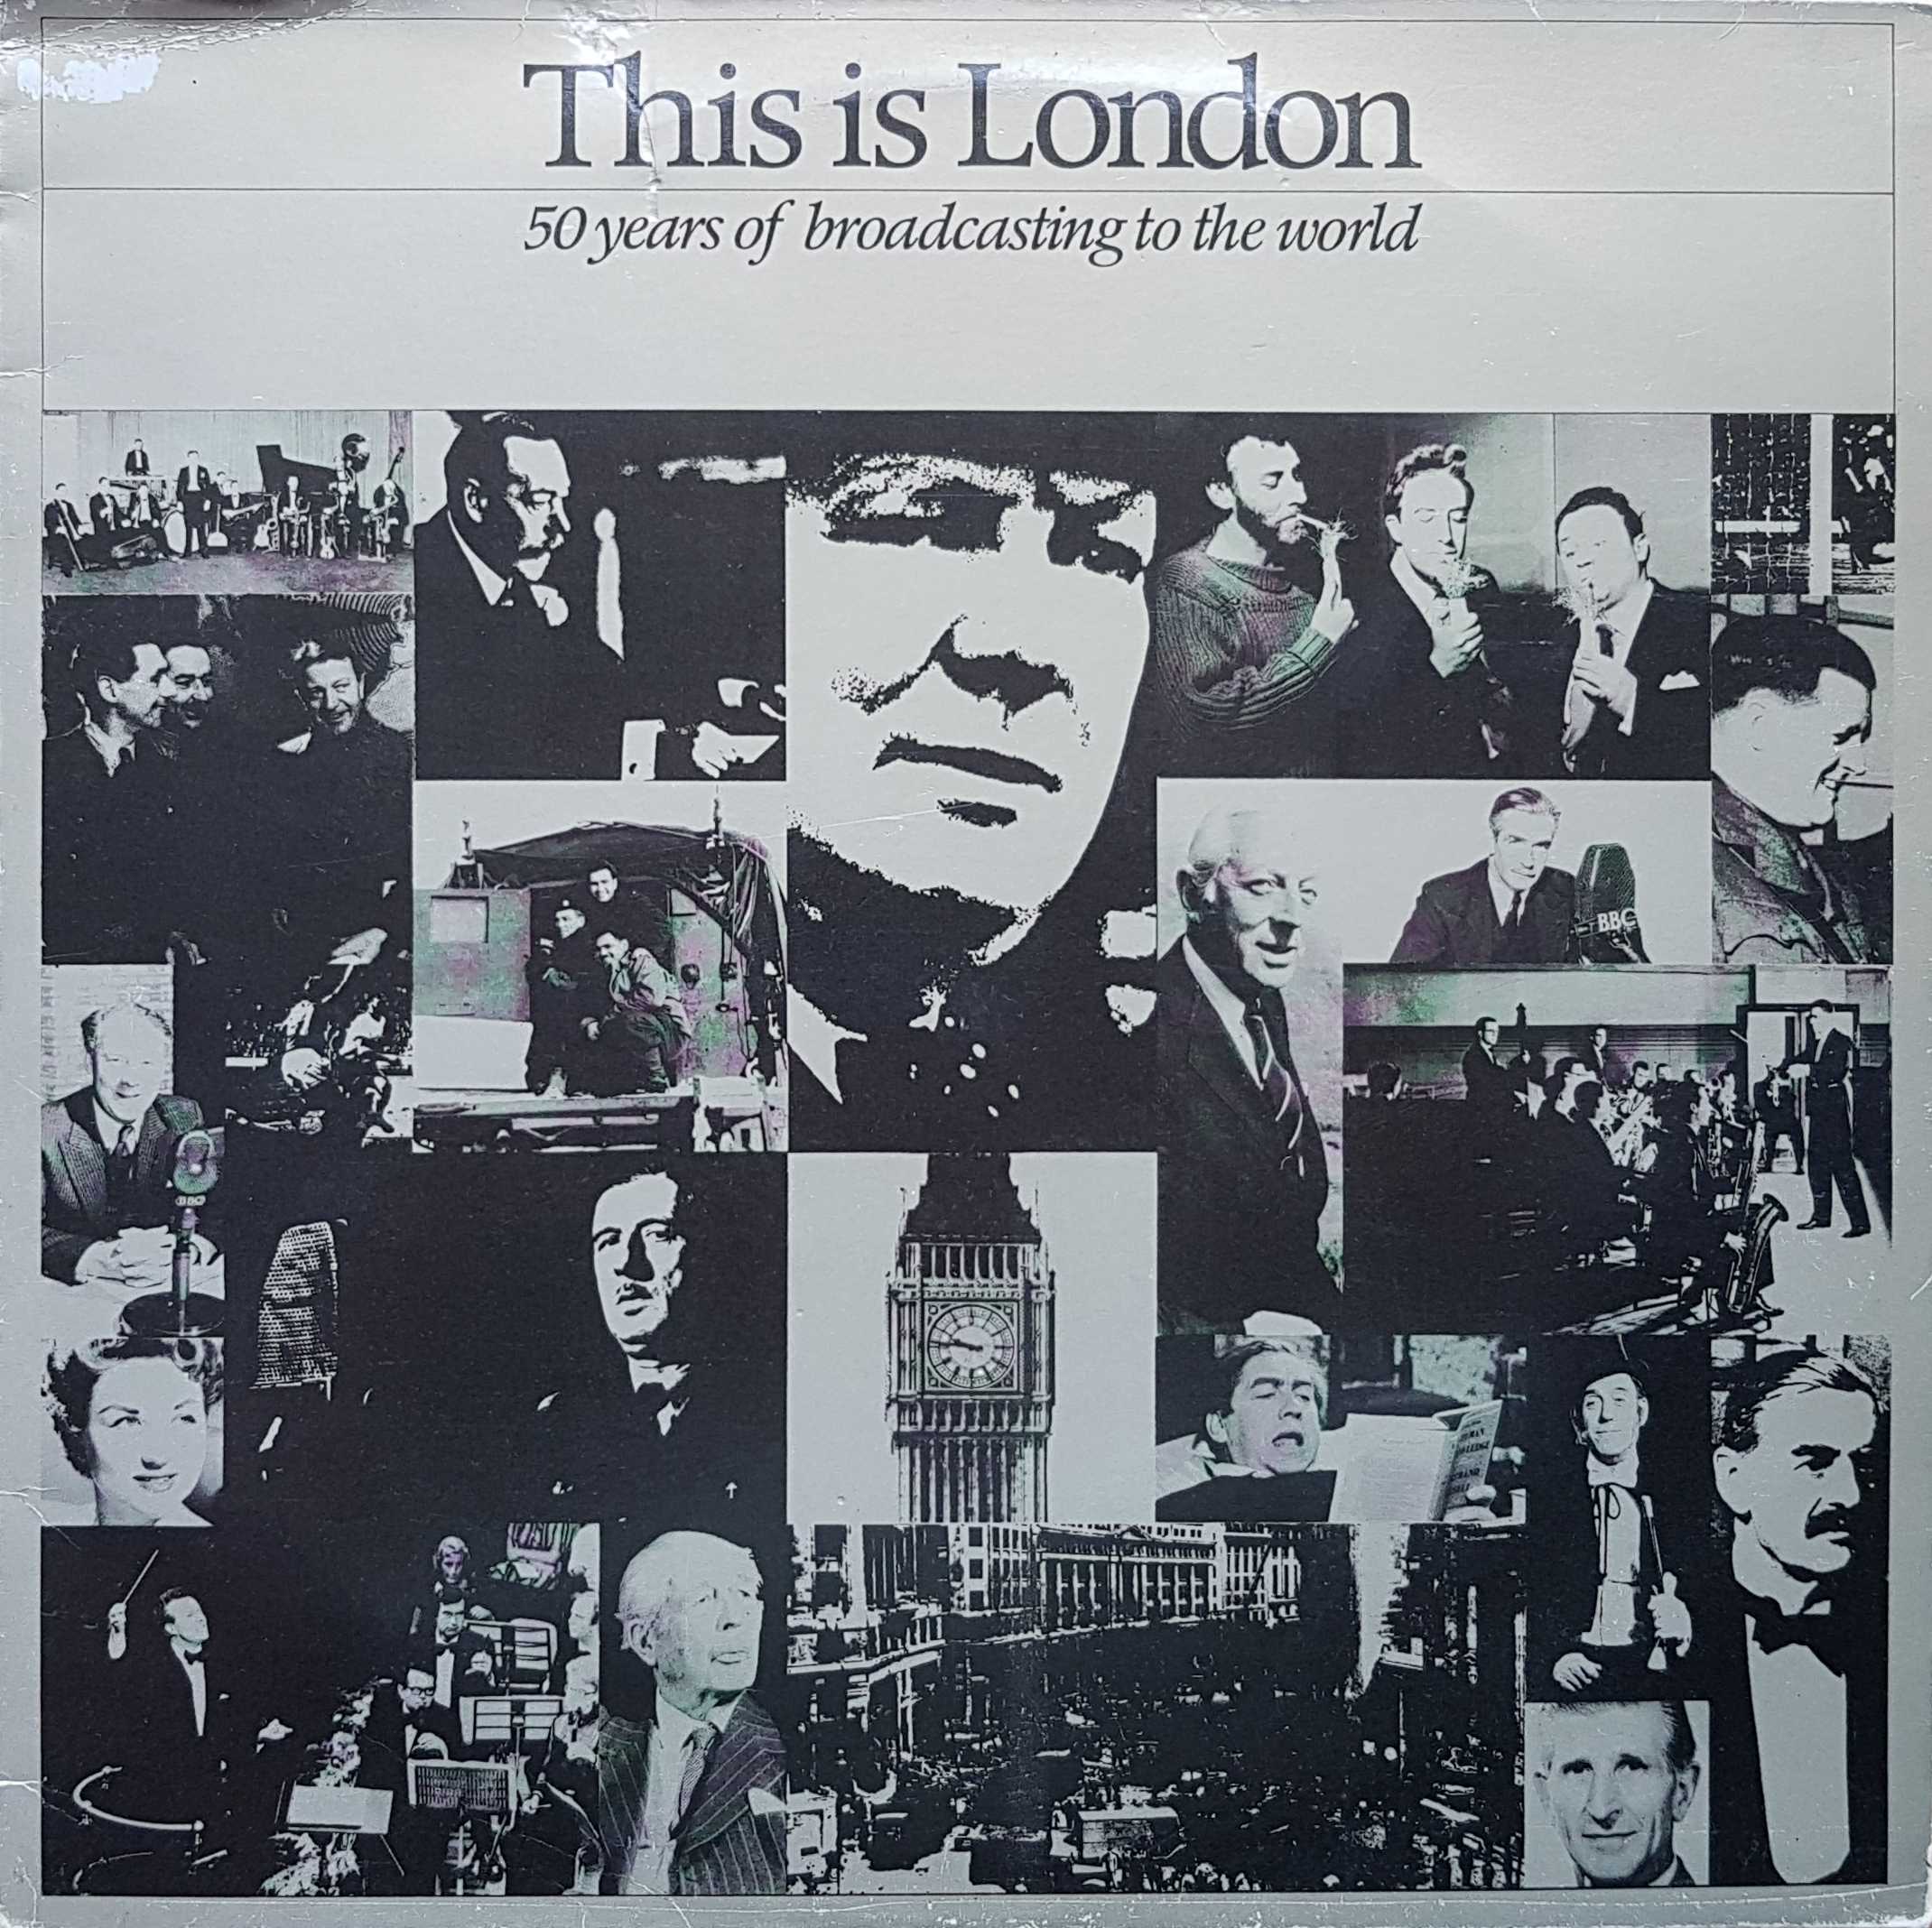 Picture of 151457 - 2 This is London - 50 years of the BBC by artist Leo McKern from the BBC albums - Records and Tapes library